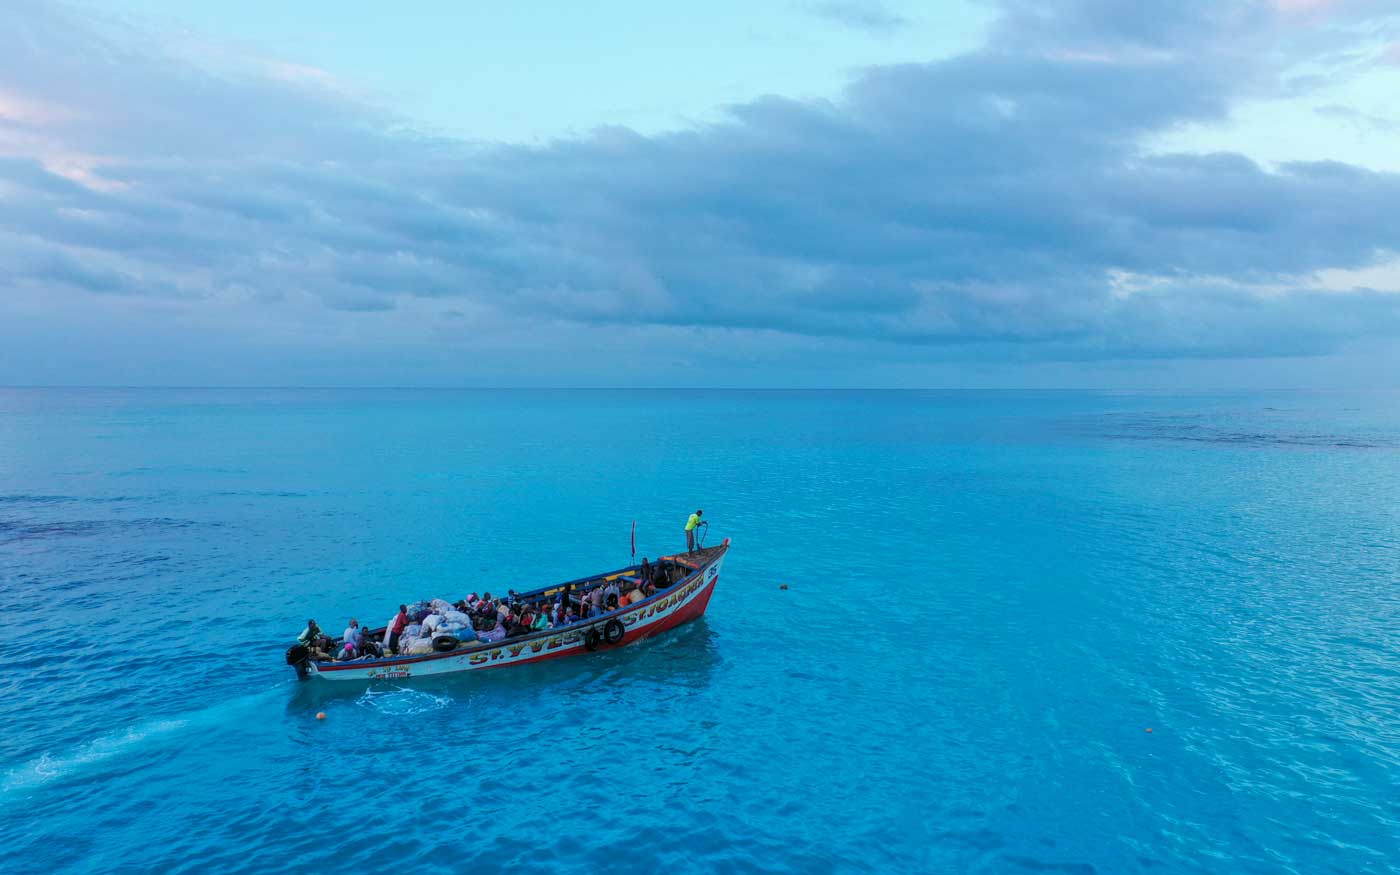 large wooden boat with haitians on the open ocean